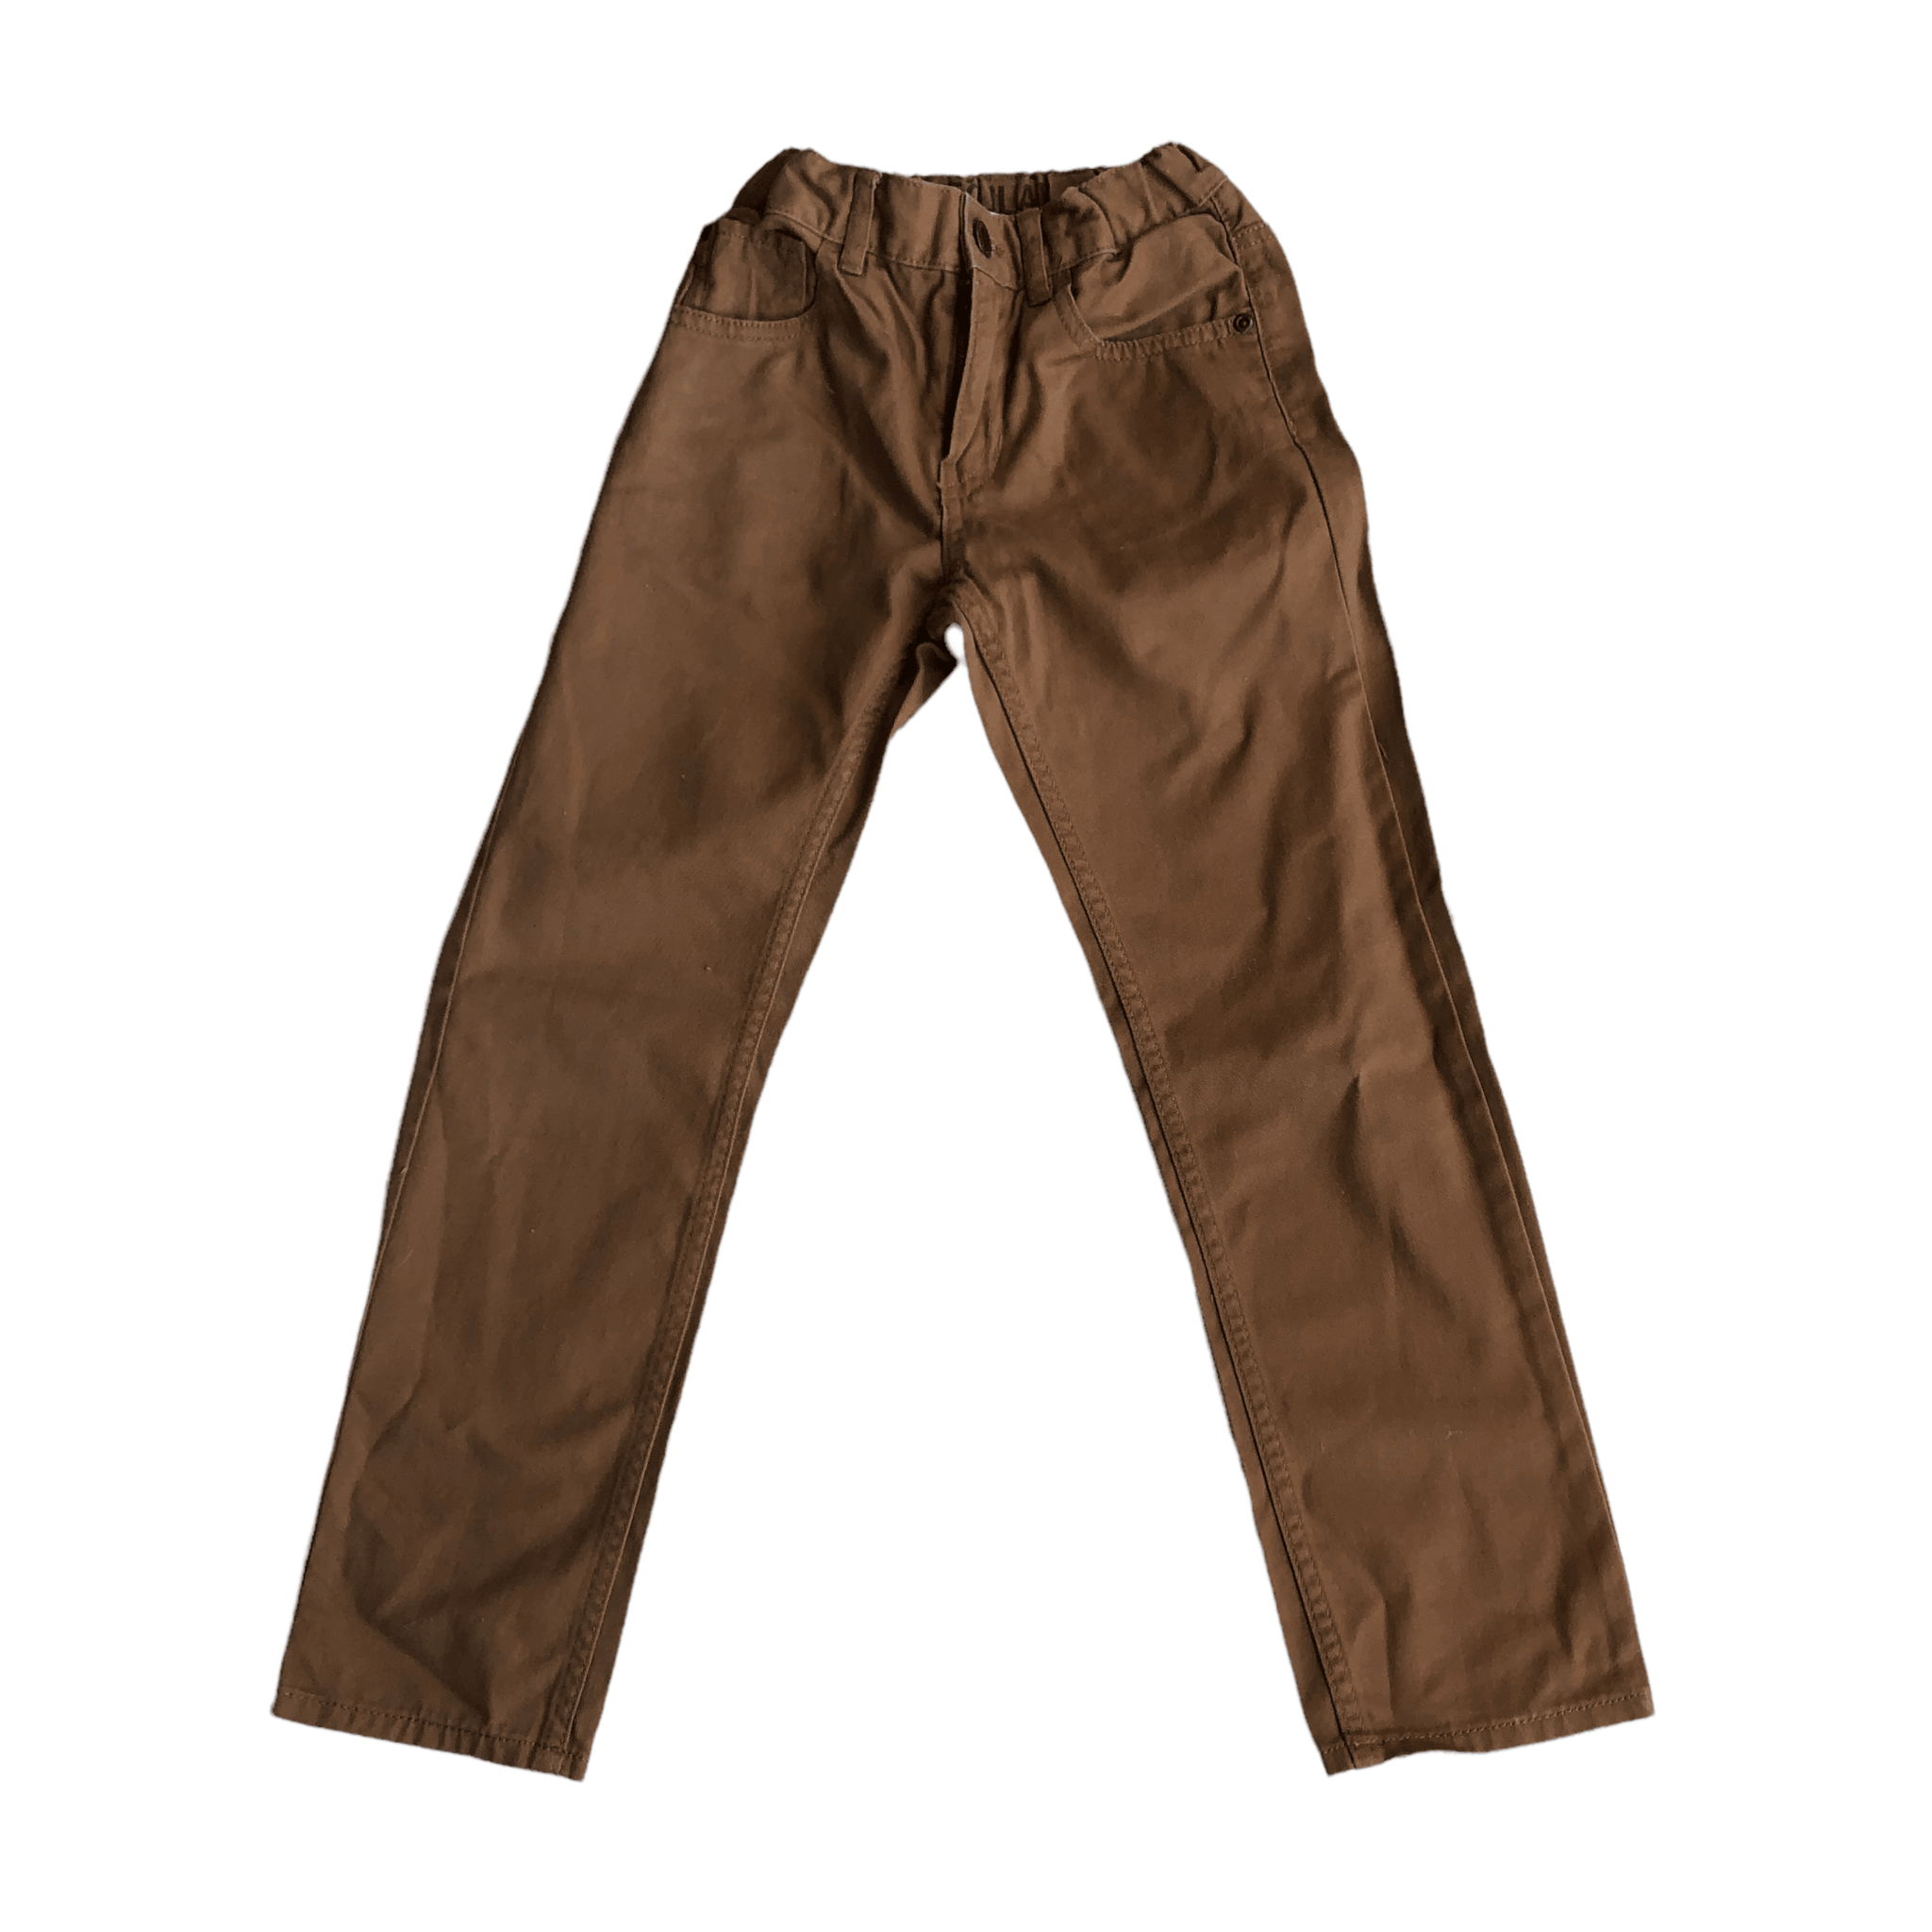 Pre-Owned H&M Tan Boys Pants (Age 6-7) The Re-Generation